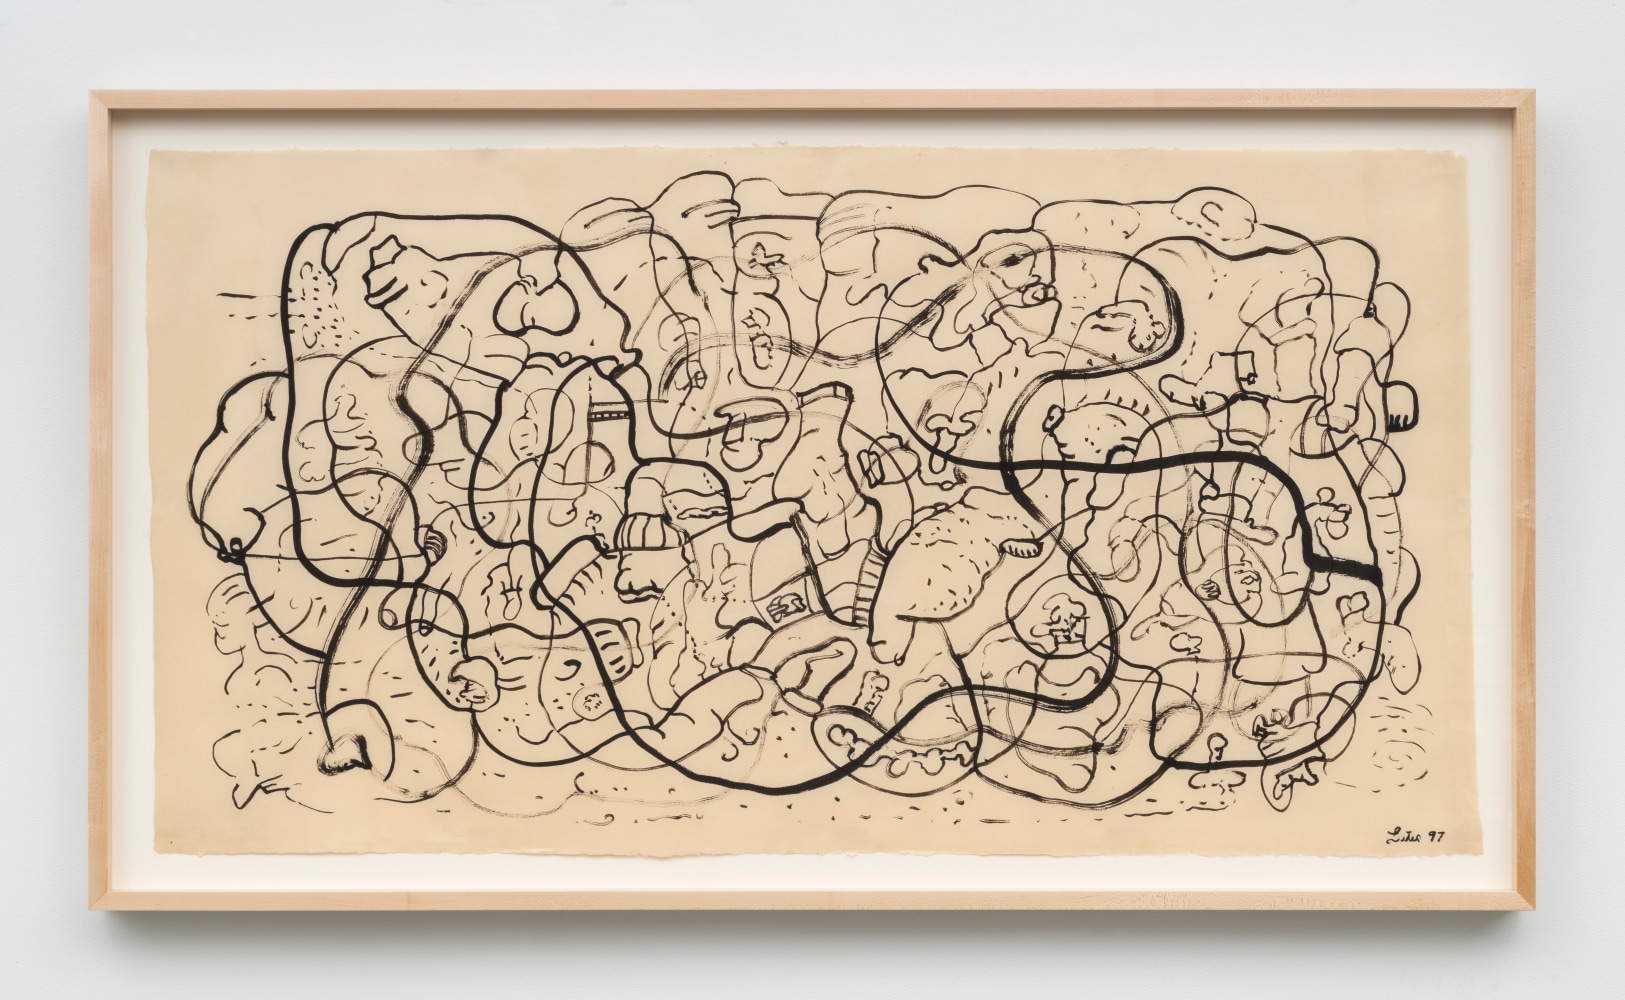 Jim Lutes
All wrong, Alright?, 1997
Ink on Japanese paper
29&amp;nbsp;&amp;frac12; &amp;times; 55&amp;nbsp;&amp;frac14; in.
(74.9 &amp;times; 140.3 cm)
&amp;nbsp;